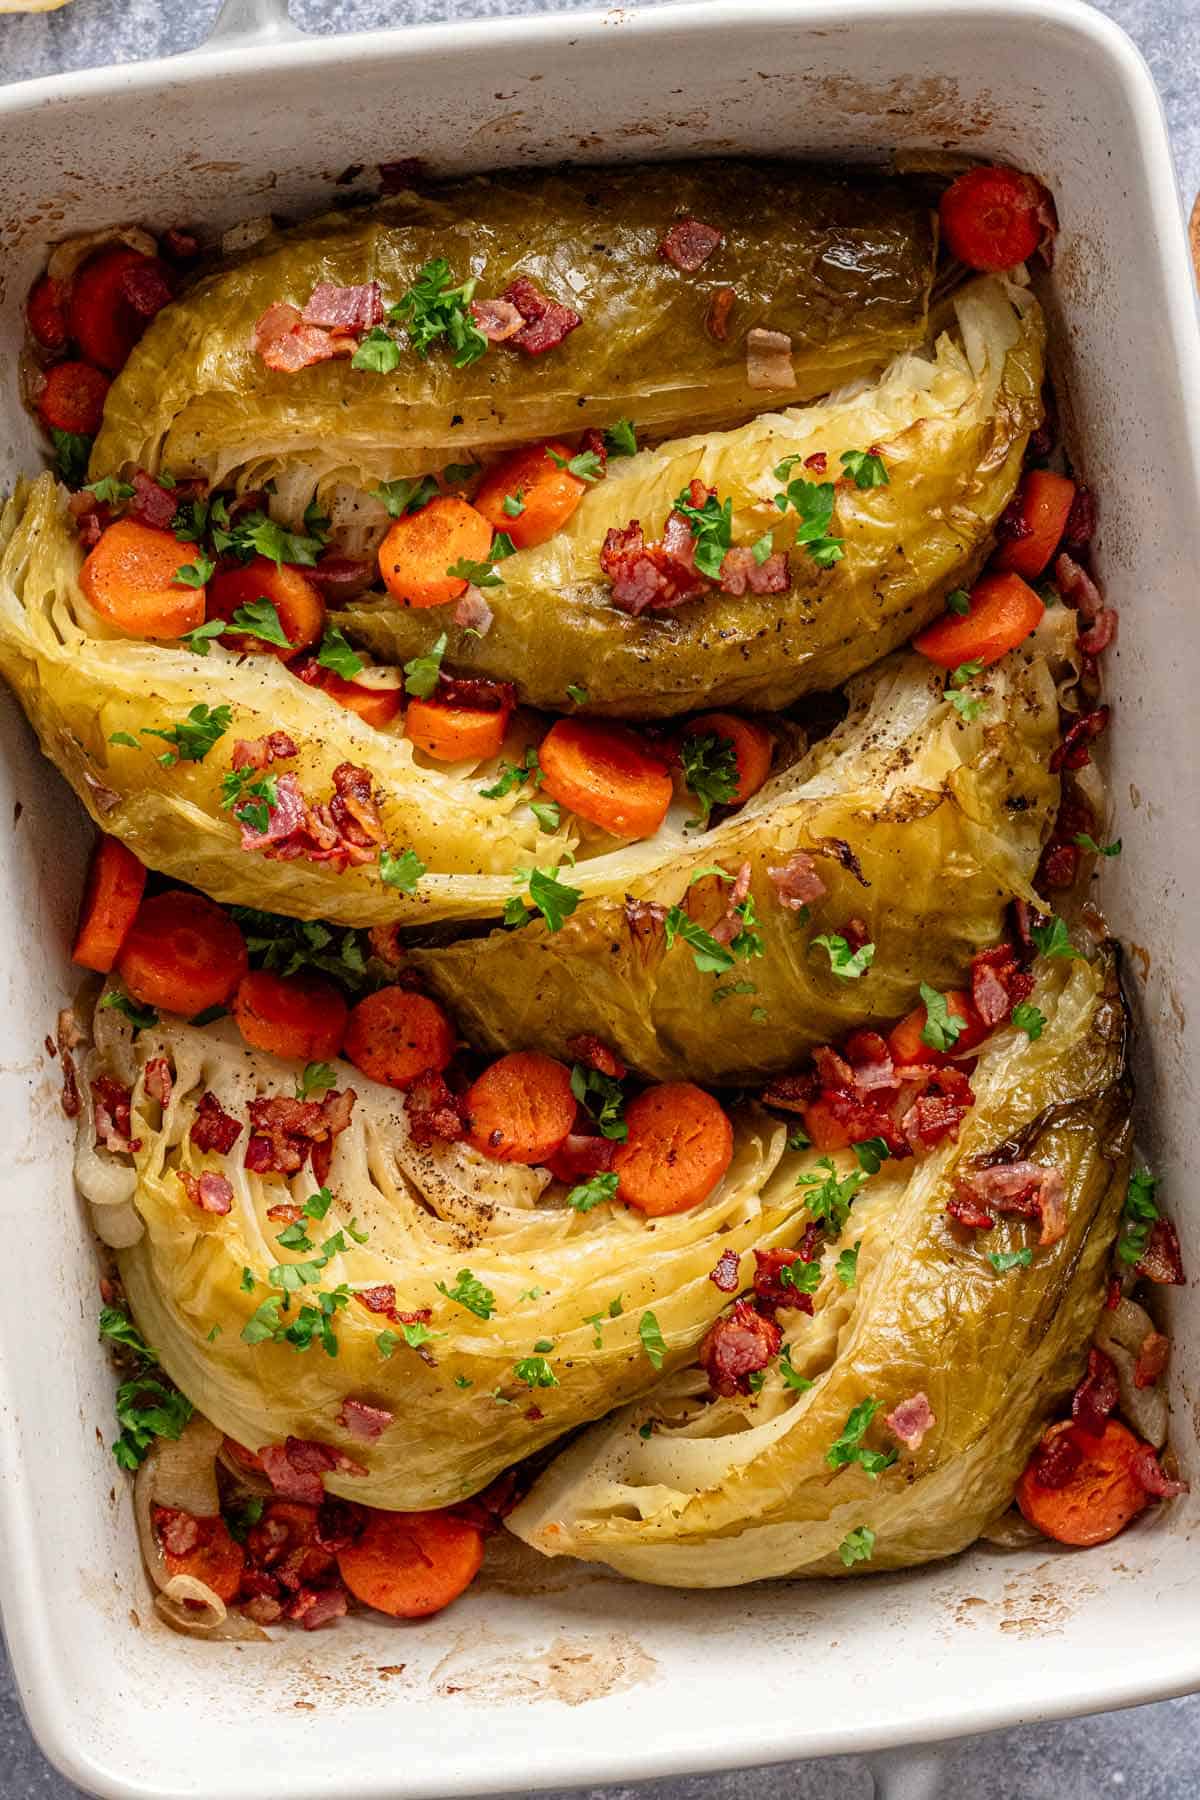 braised cabbage with vegetables in casserole dish.